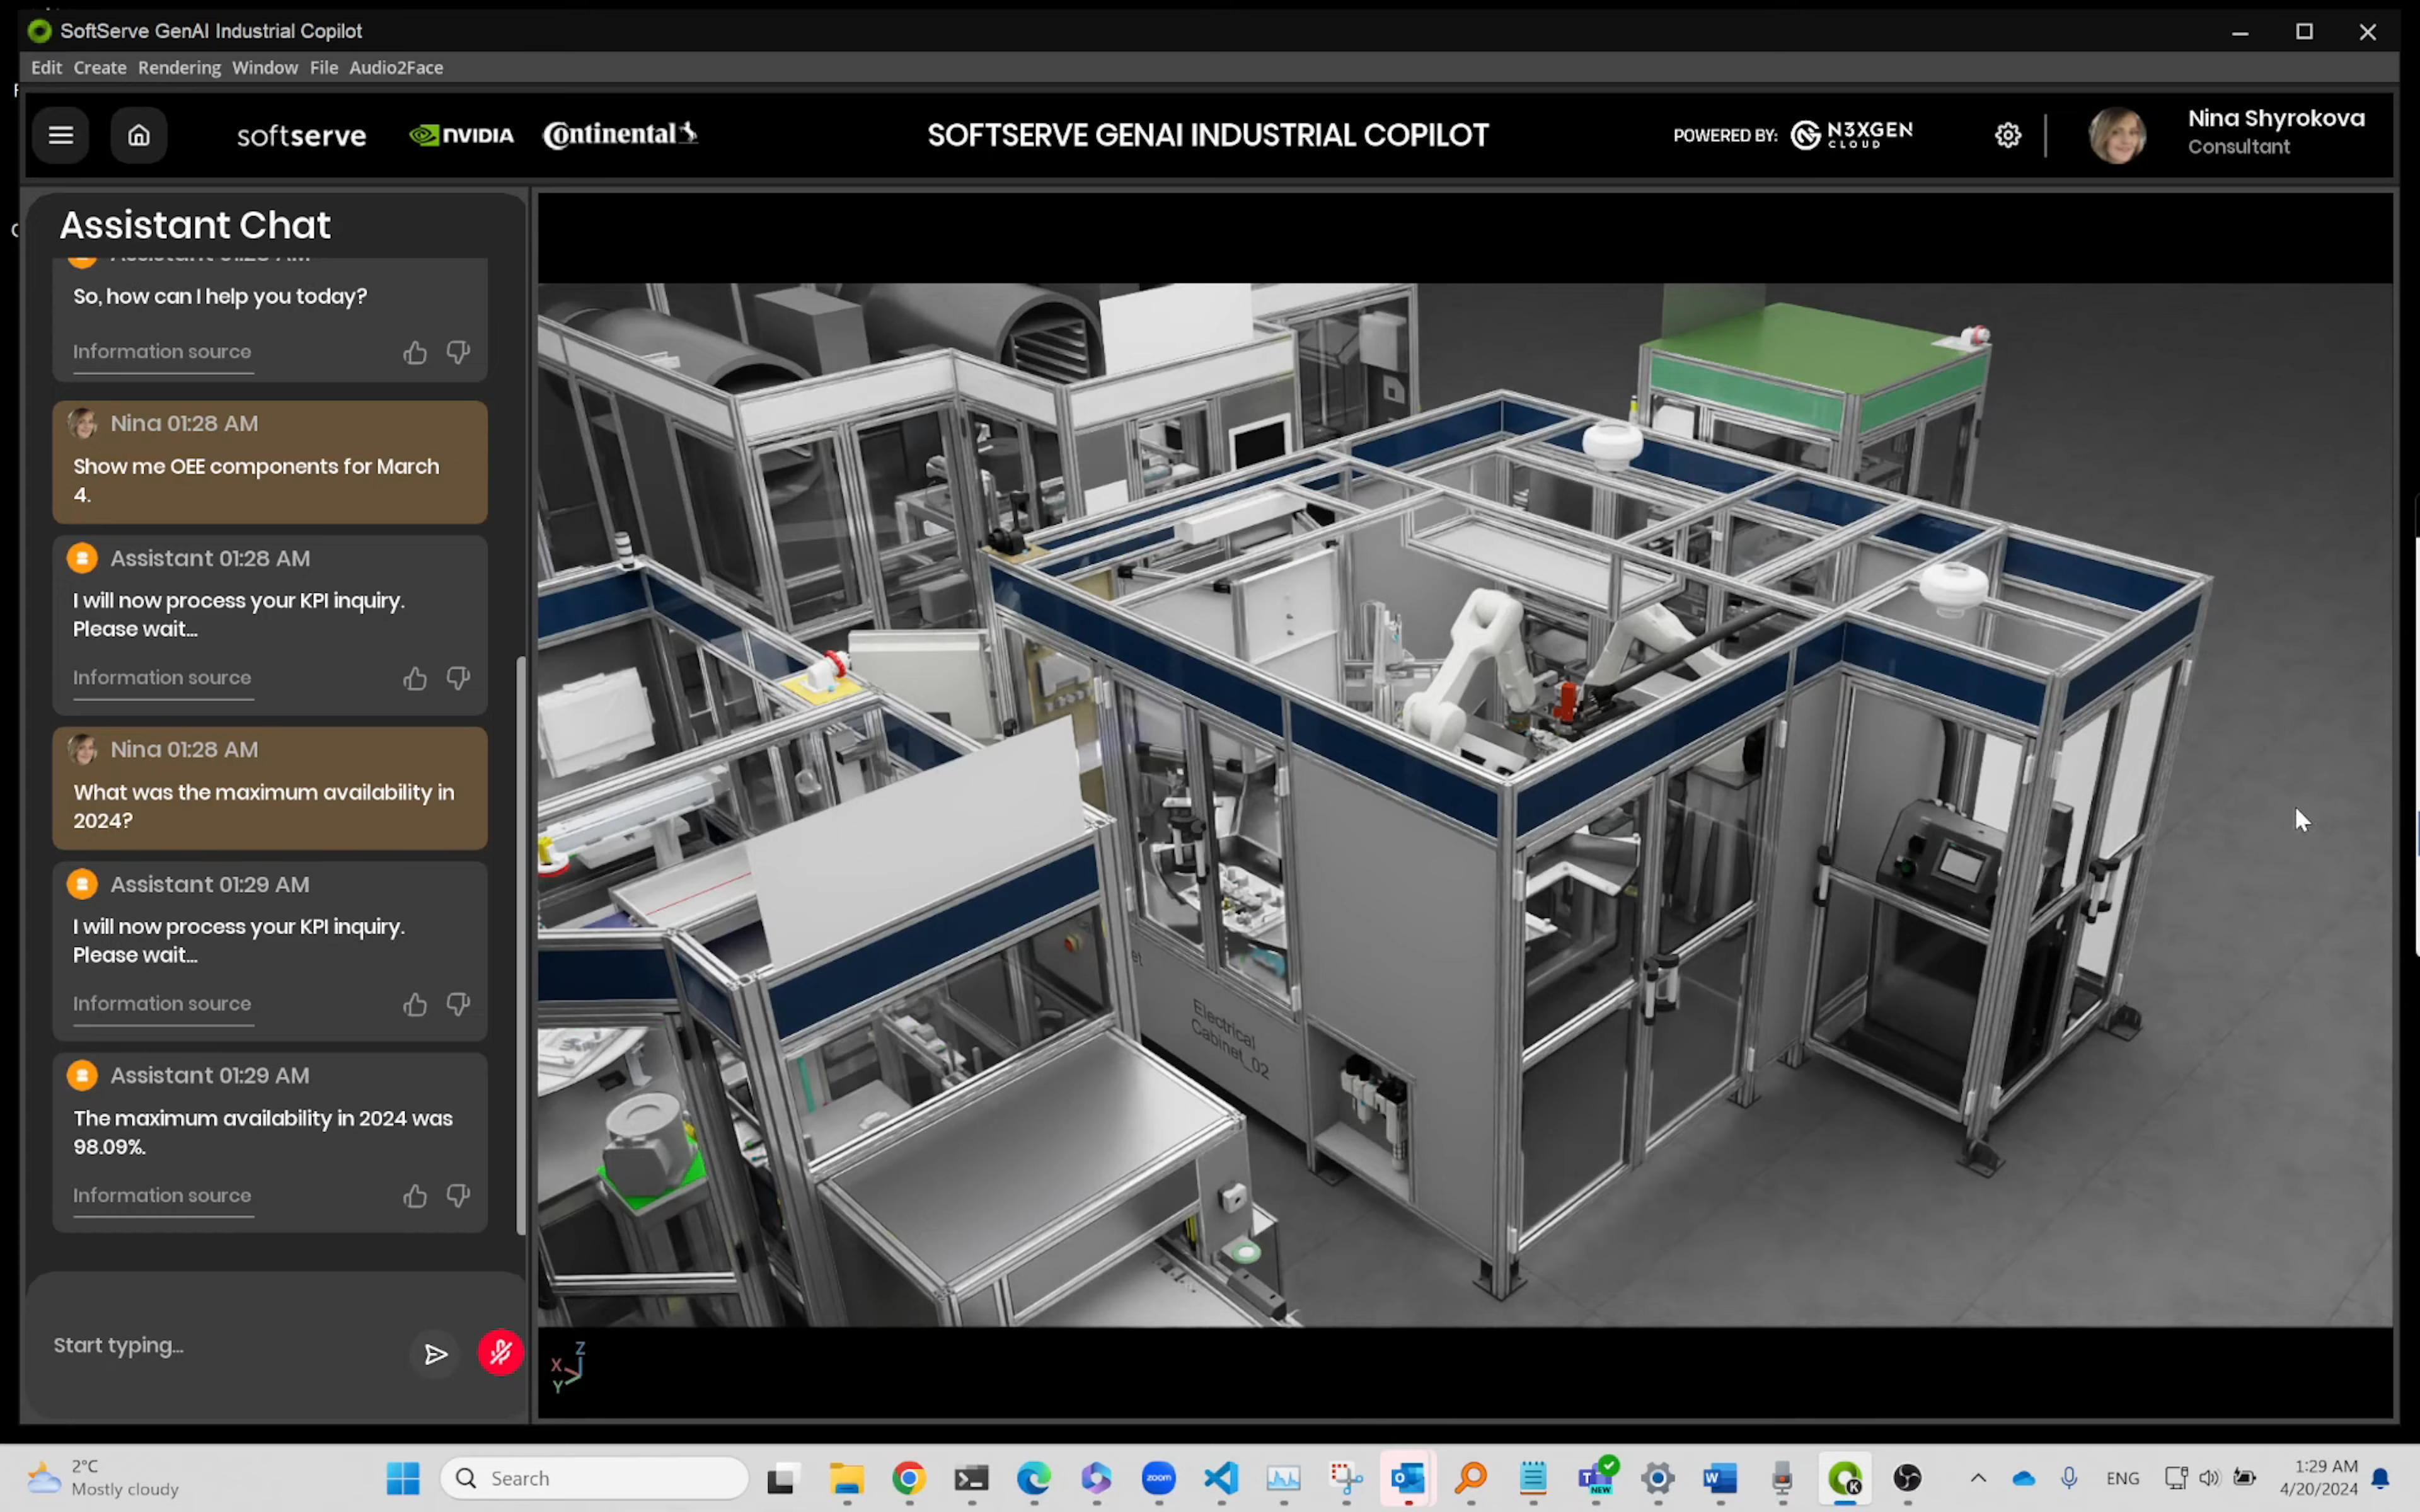 Screenshot of SoftServe Industrial Co-Pilot. The left pane is a chat window. The right pane is a 3D model of a factory. The chat window has a text input field at the bottom. The 3D model has a toolbar at the top. The toolbar has buttons for zooming, panning, and rotating the model.